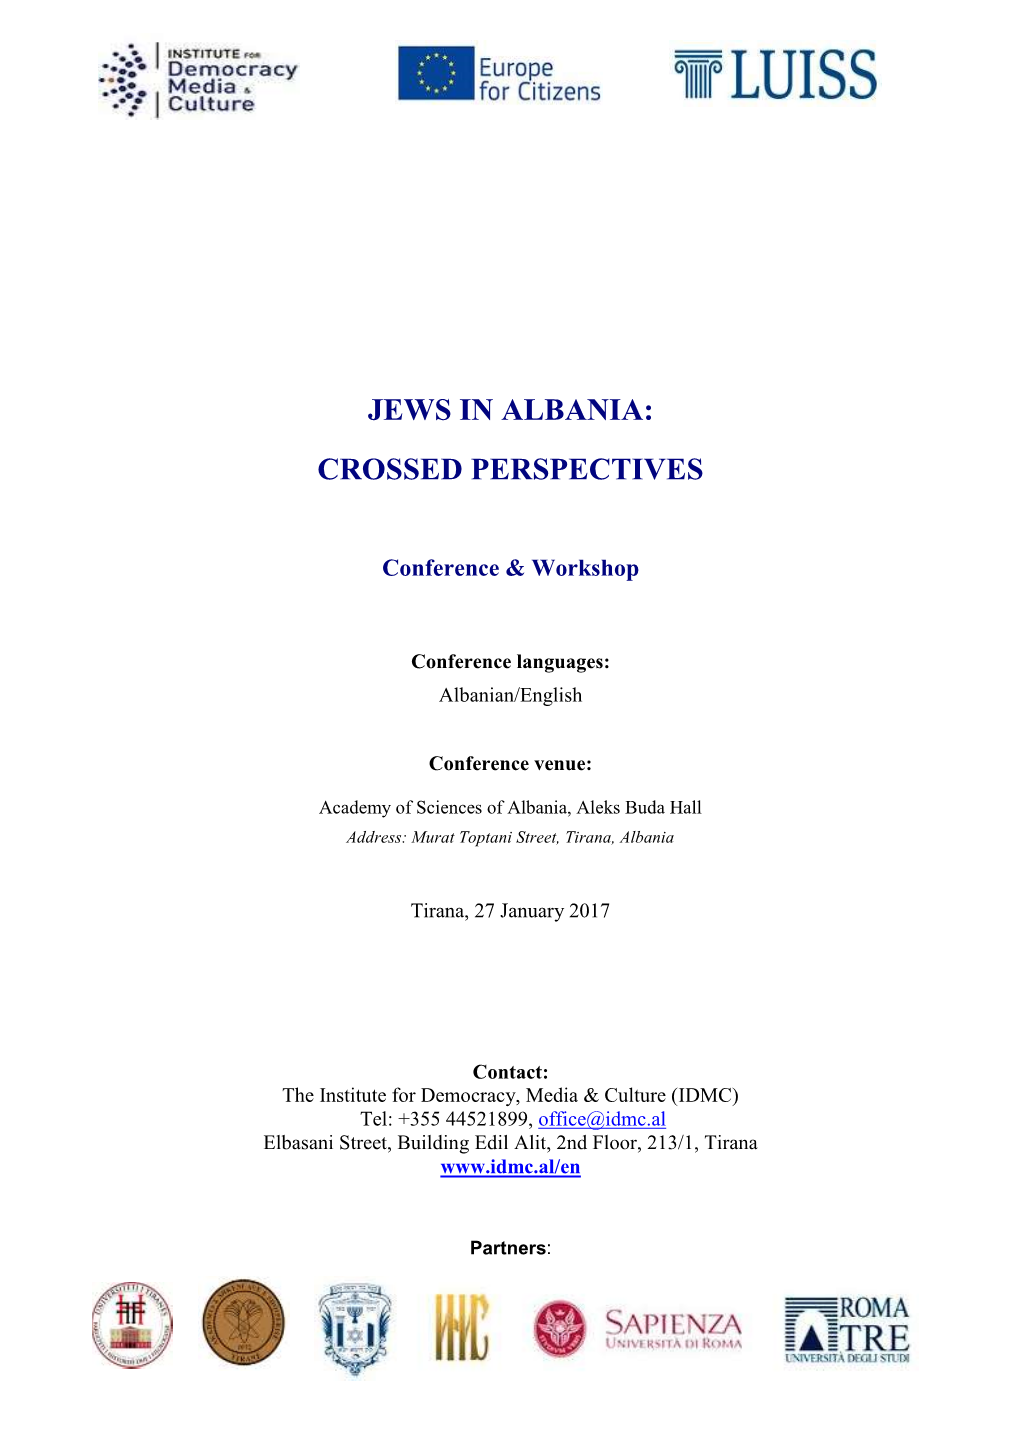 Jews in Albania: Crossed Perspectives